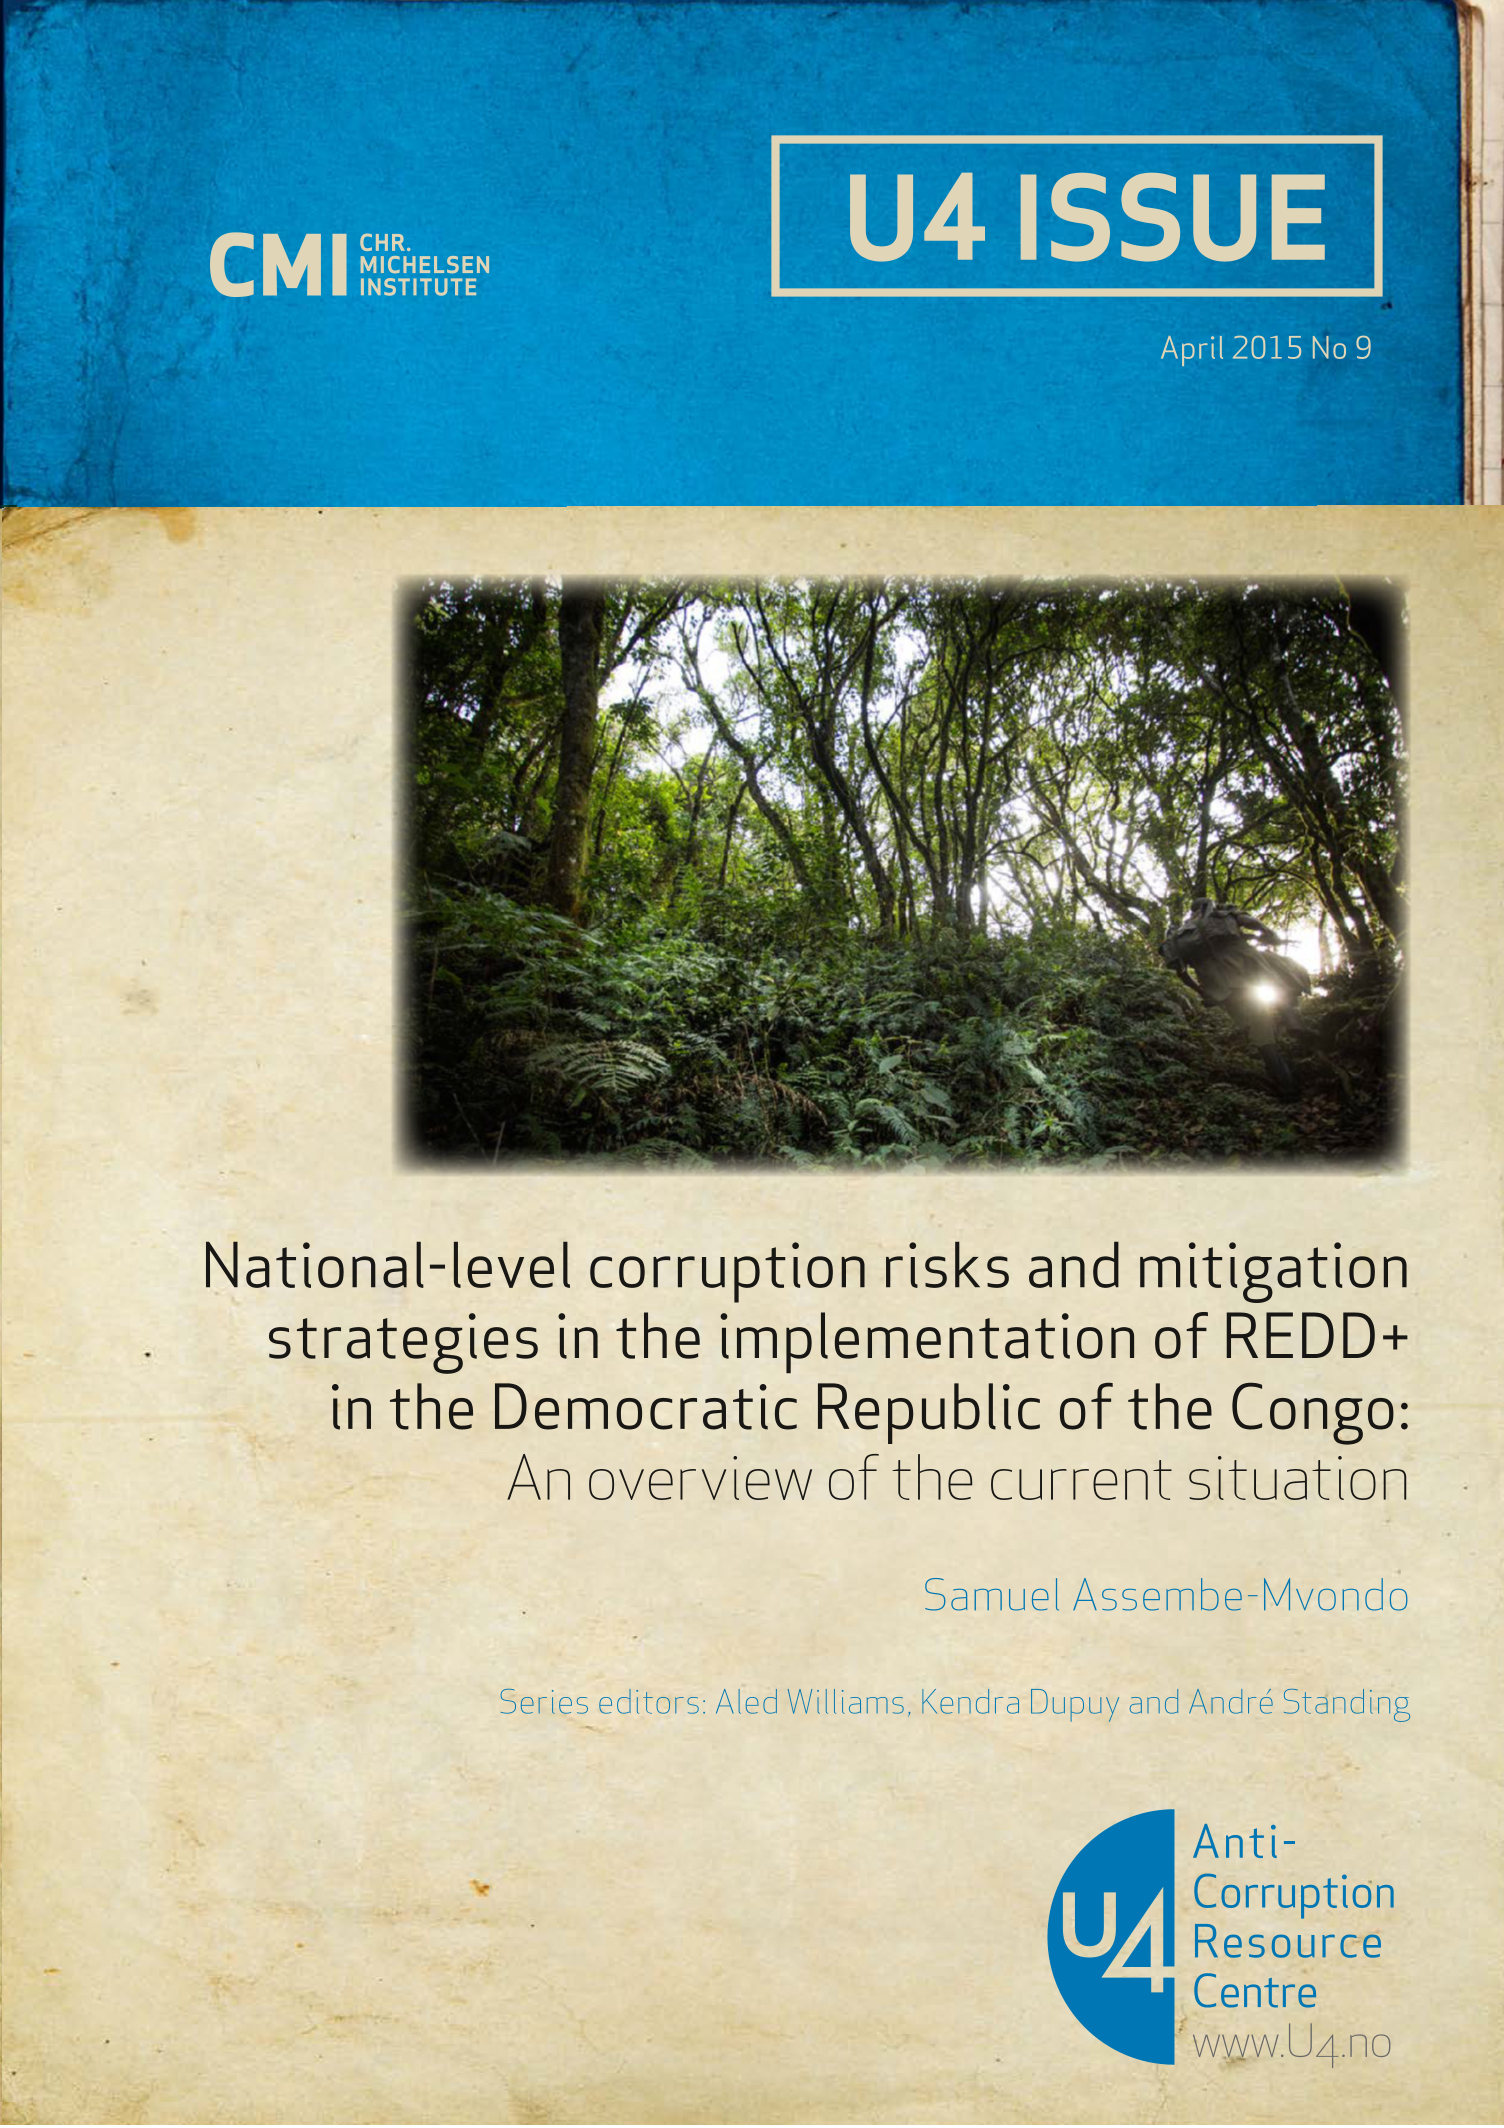 National-level corruption risks and mitigation strategies in the implementation of REDD+ in the Democratic Republic of the Congo: An overview of the current situation